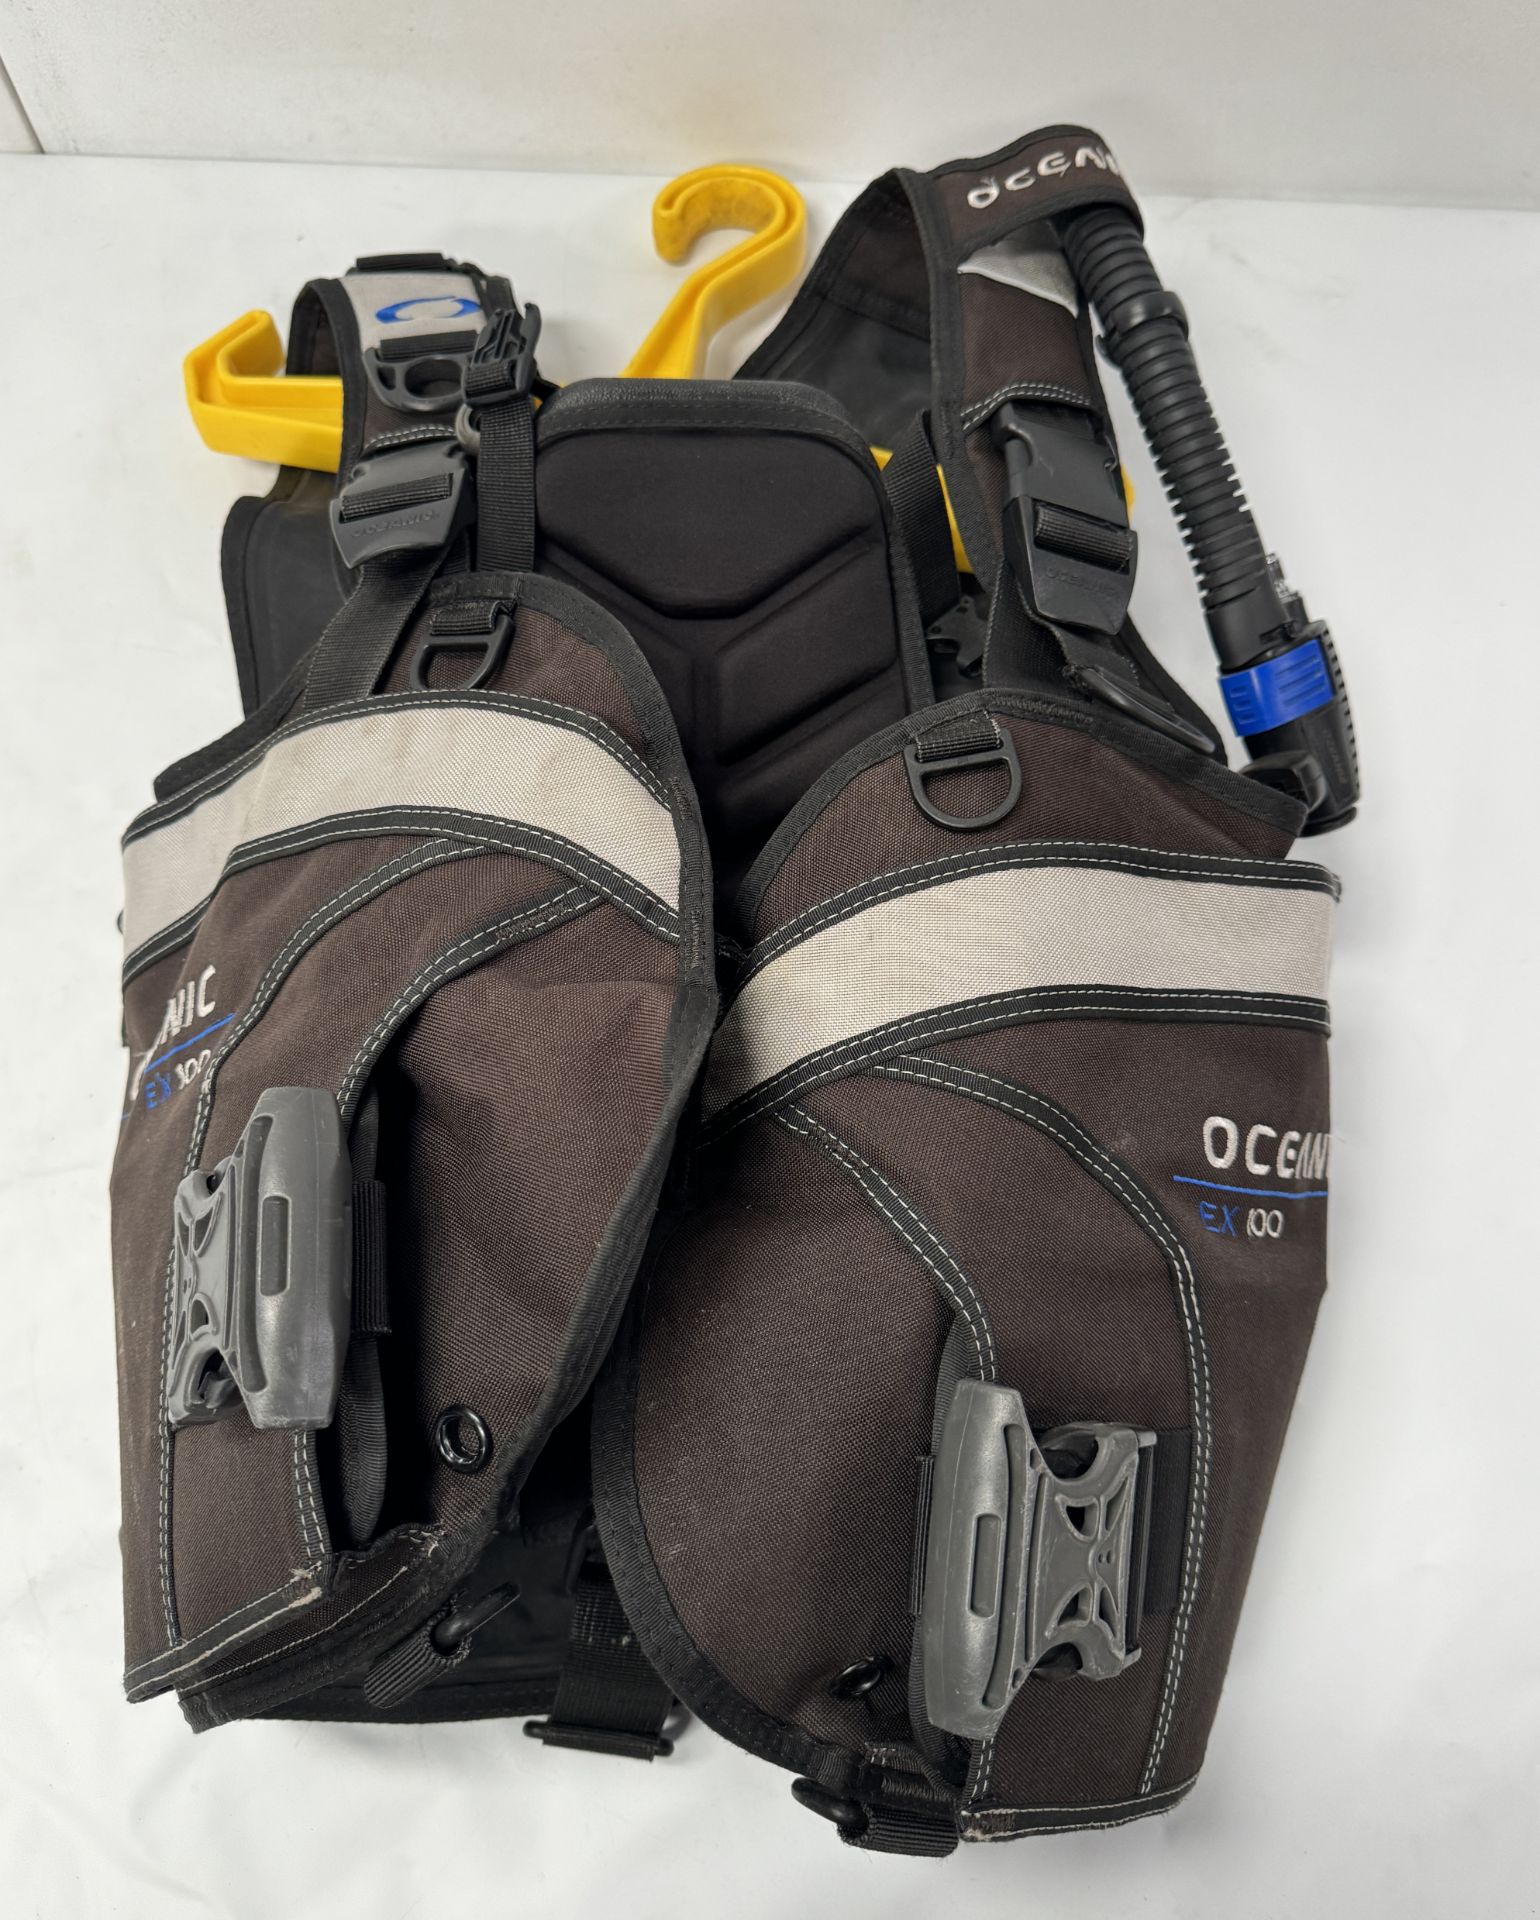 Souli3 Aqualung (Size MD) & Oceanic EX100 (Size SM) Buoyancy Compensators (Location: Brentwood. - Image 3 of 5